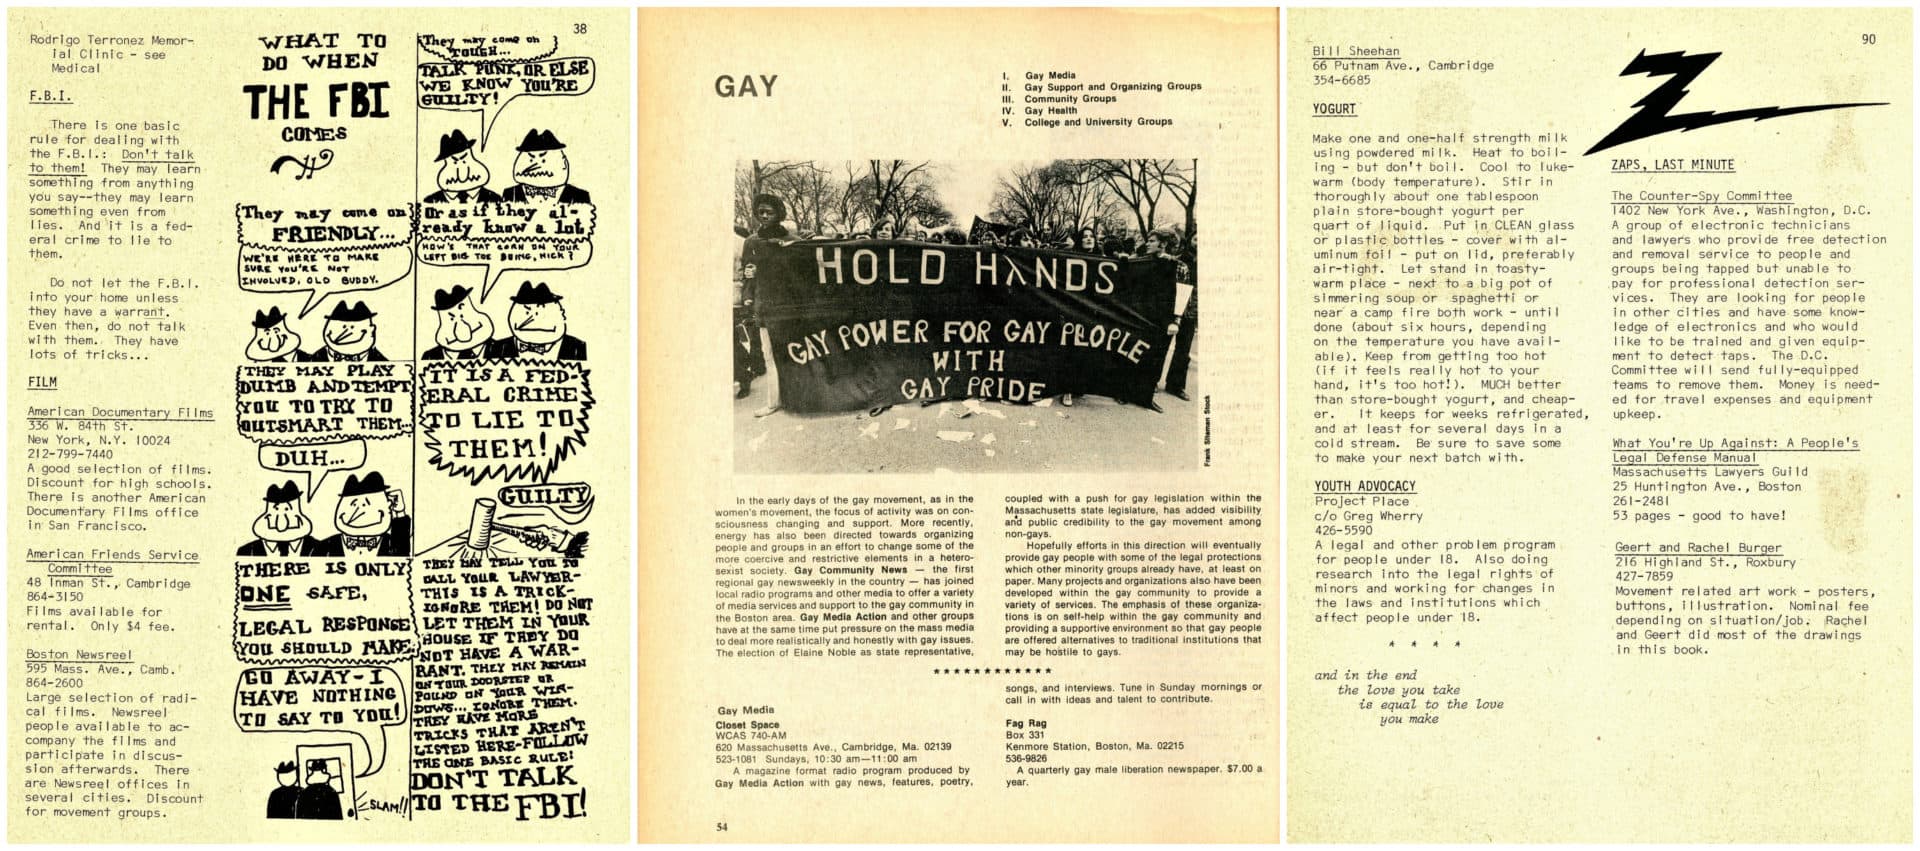 From left to right: A cartoon from the 1971 People's Yellow Pages explaining a citizen's rights when approached by the FBI; A page from the 1976 edition with gay liberation listings; A recipe for yogurt in the 1971 edition. (Courtesy Brian Coleman)